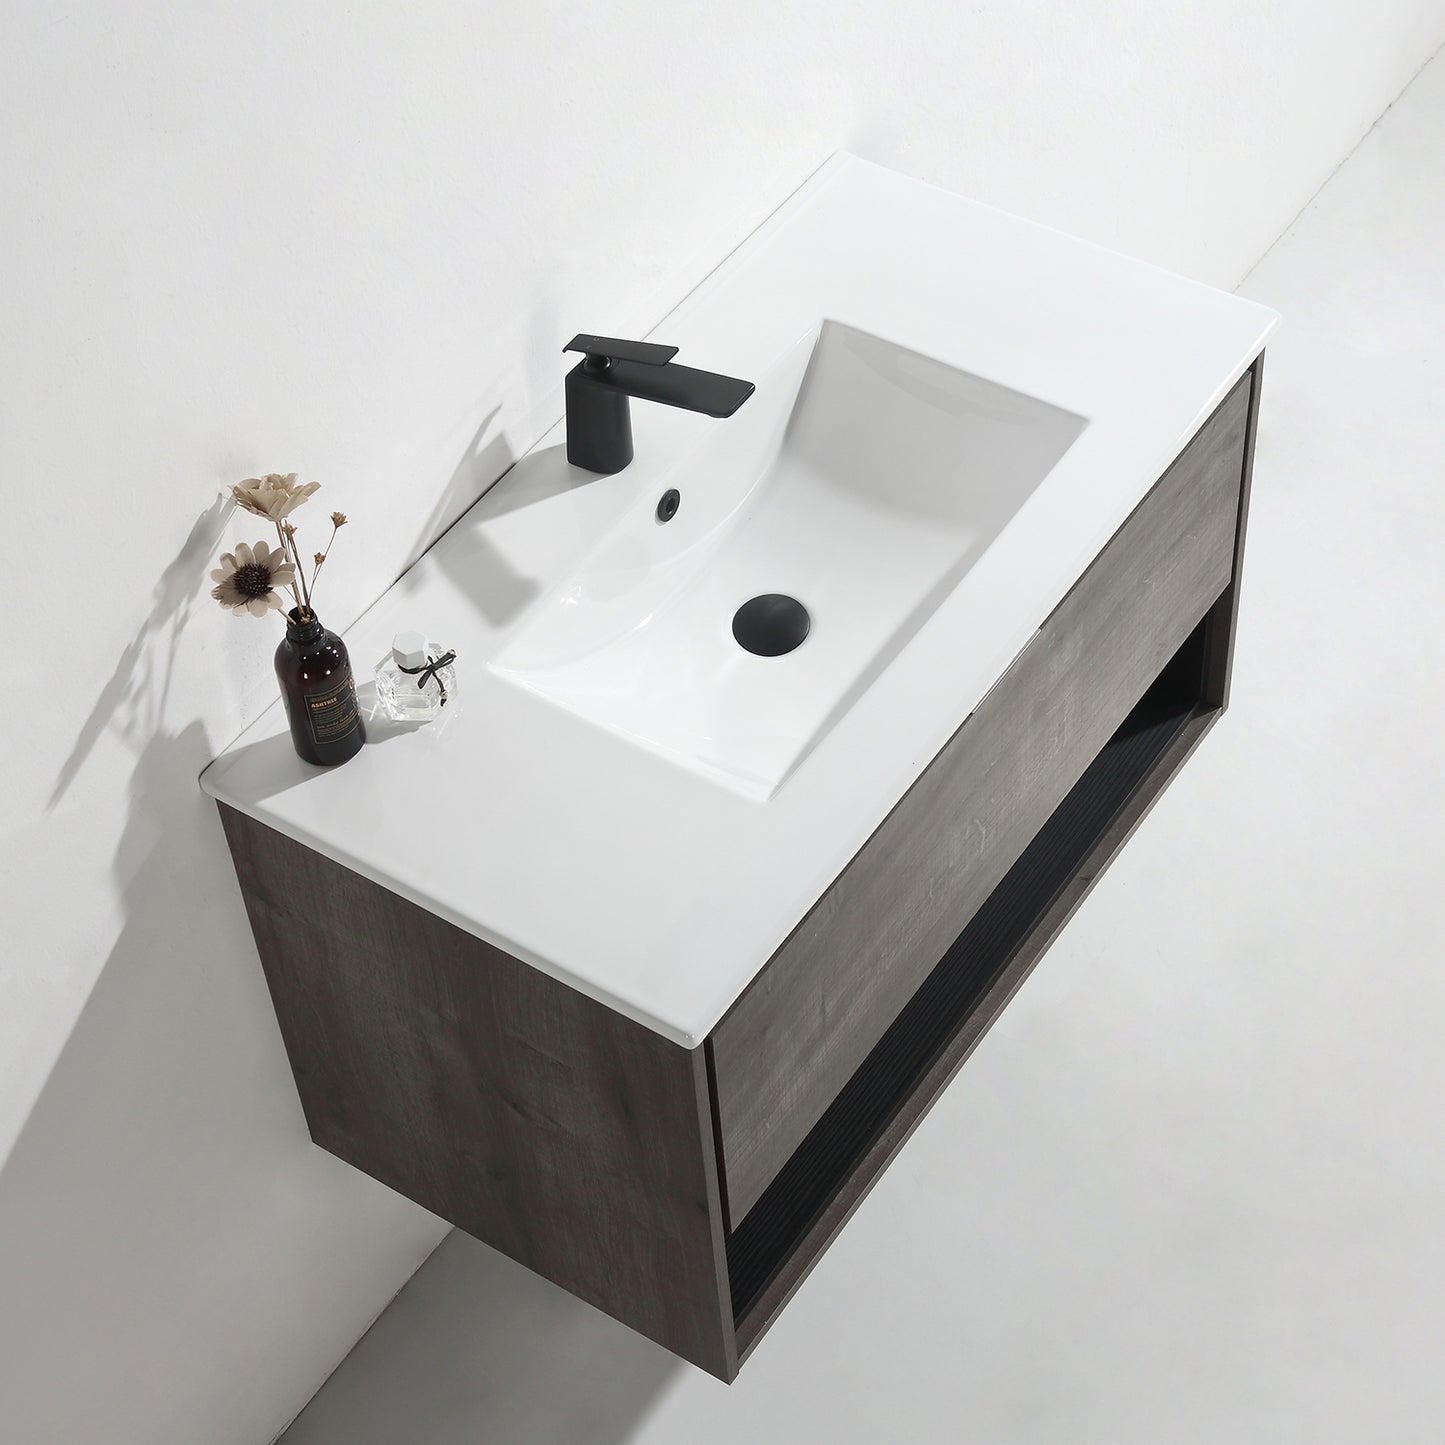 36 inches Wood Floating Bathroom Vanity Combo with Integrated Ceramic Sink and Soft Close Drawer